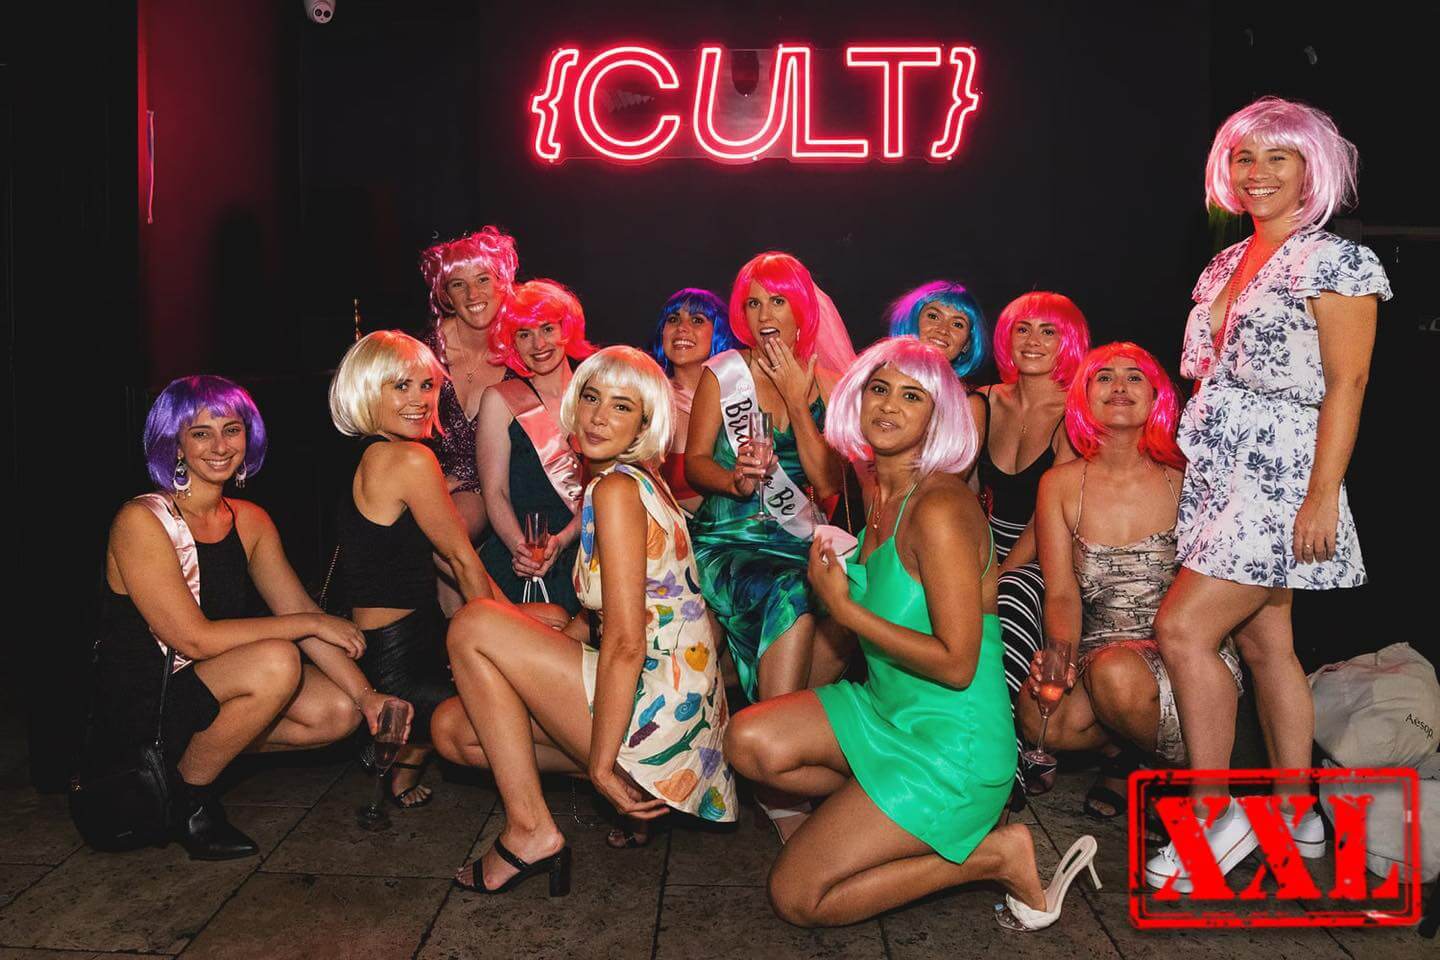 Hen with her bride tribe at XXL club in Sydney